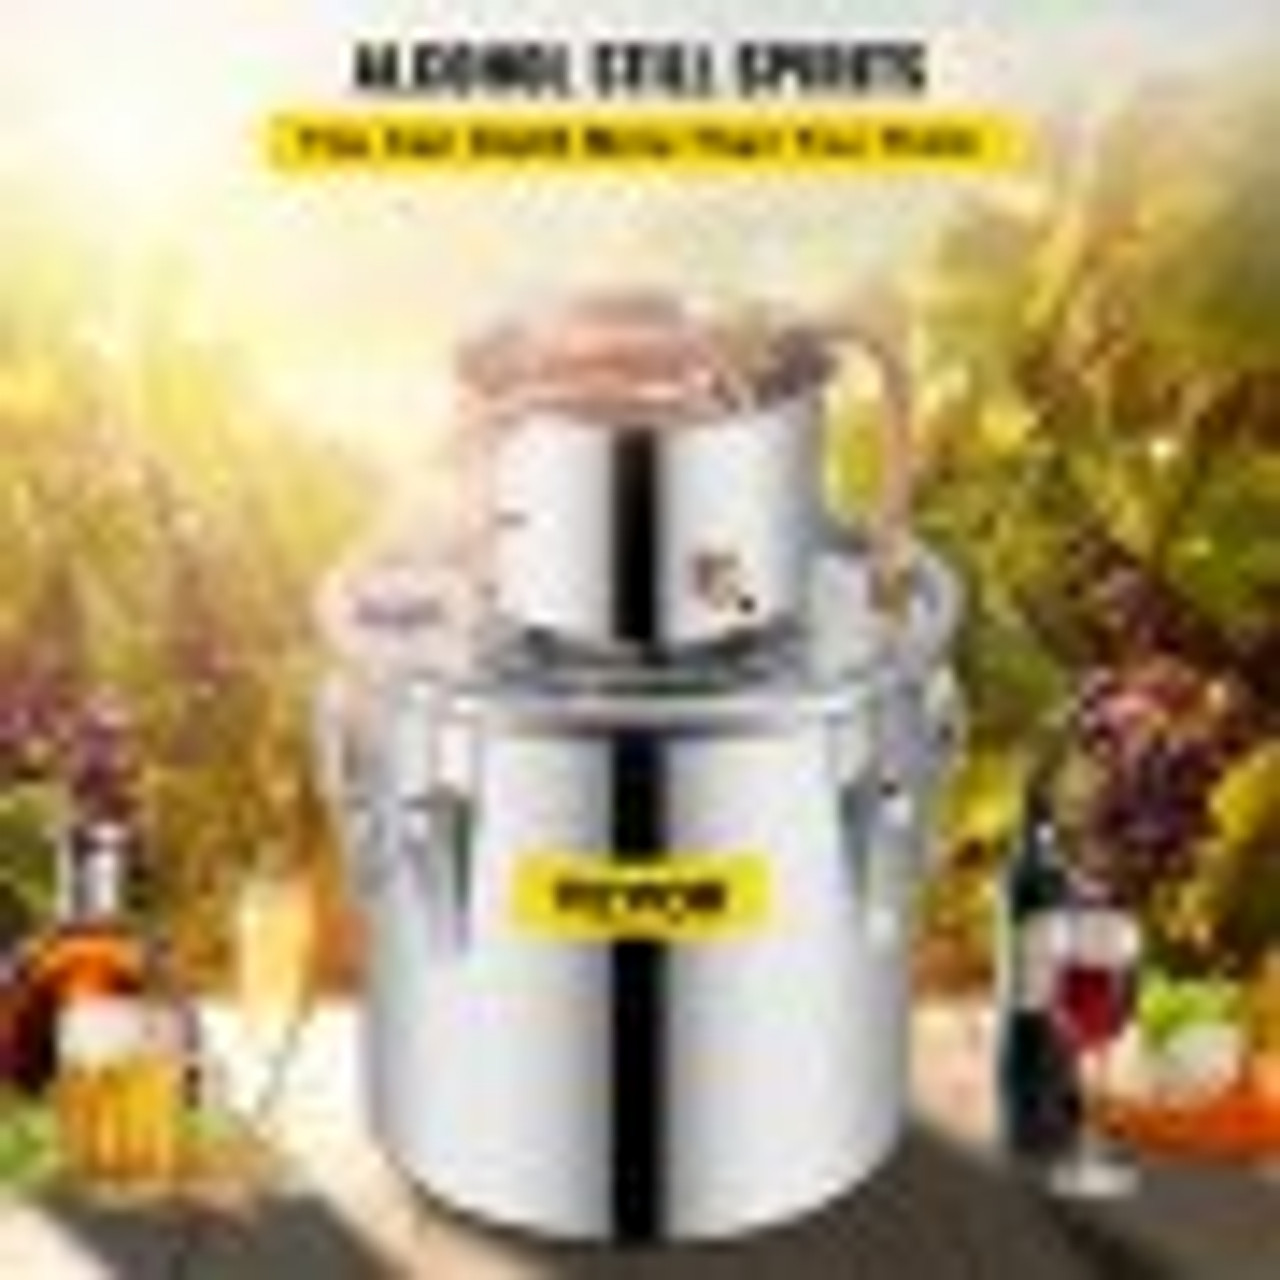 12L Water Alcohol Distiller 3GAL Copper Wine Making Boiler Multi Home DIY Brewing Distilling Kit for Fruit Wine, Water, Brandy, And Refining Plant Extract